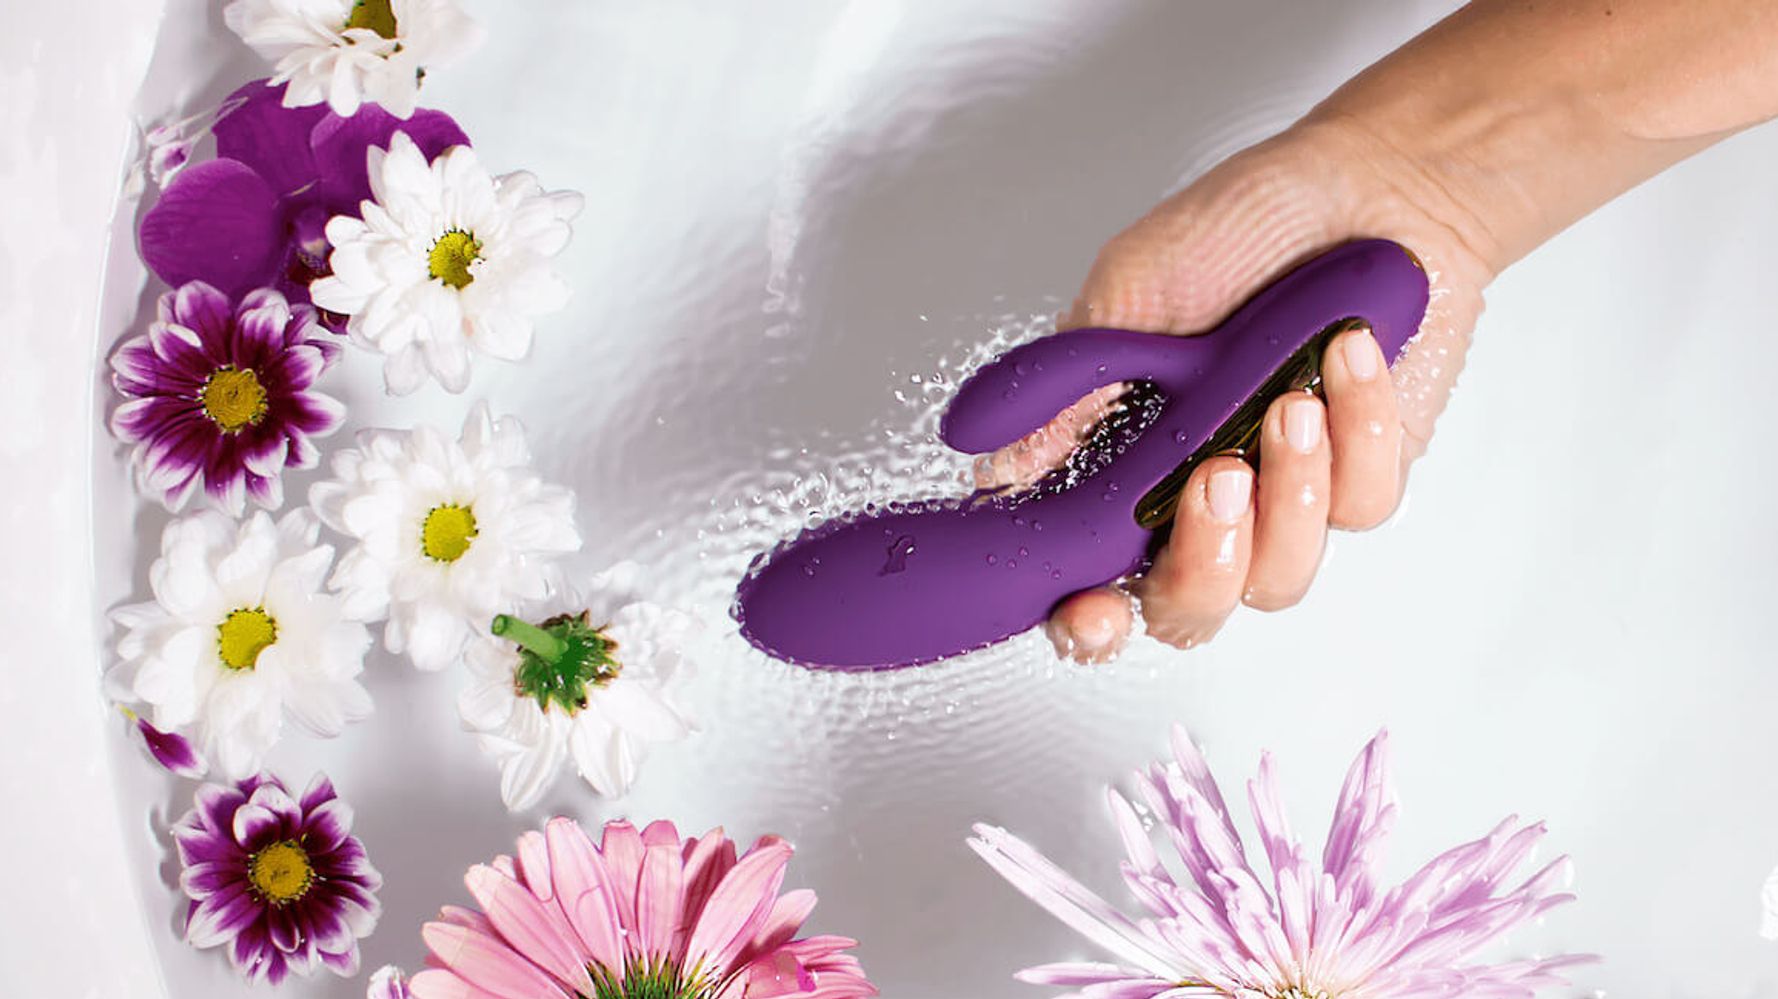 16 Sex Toys You Ll Want To Get Your Hands And Other